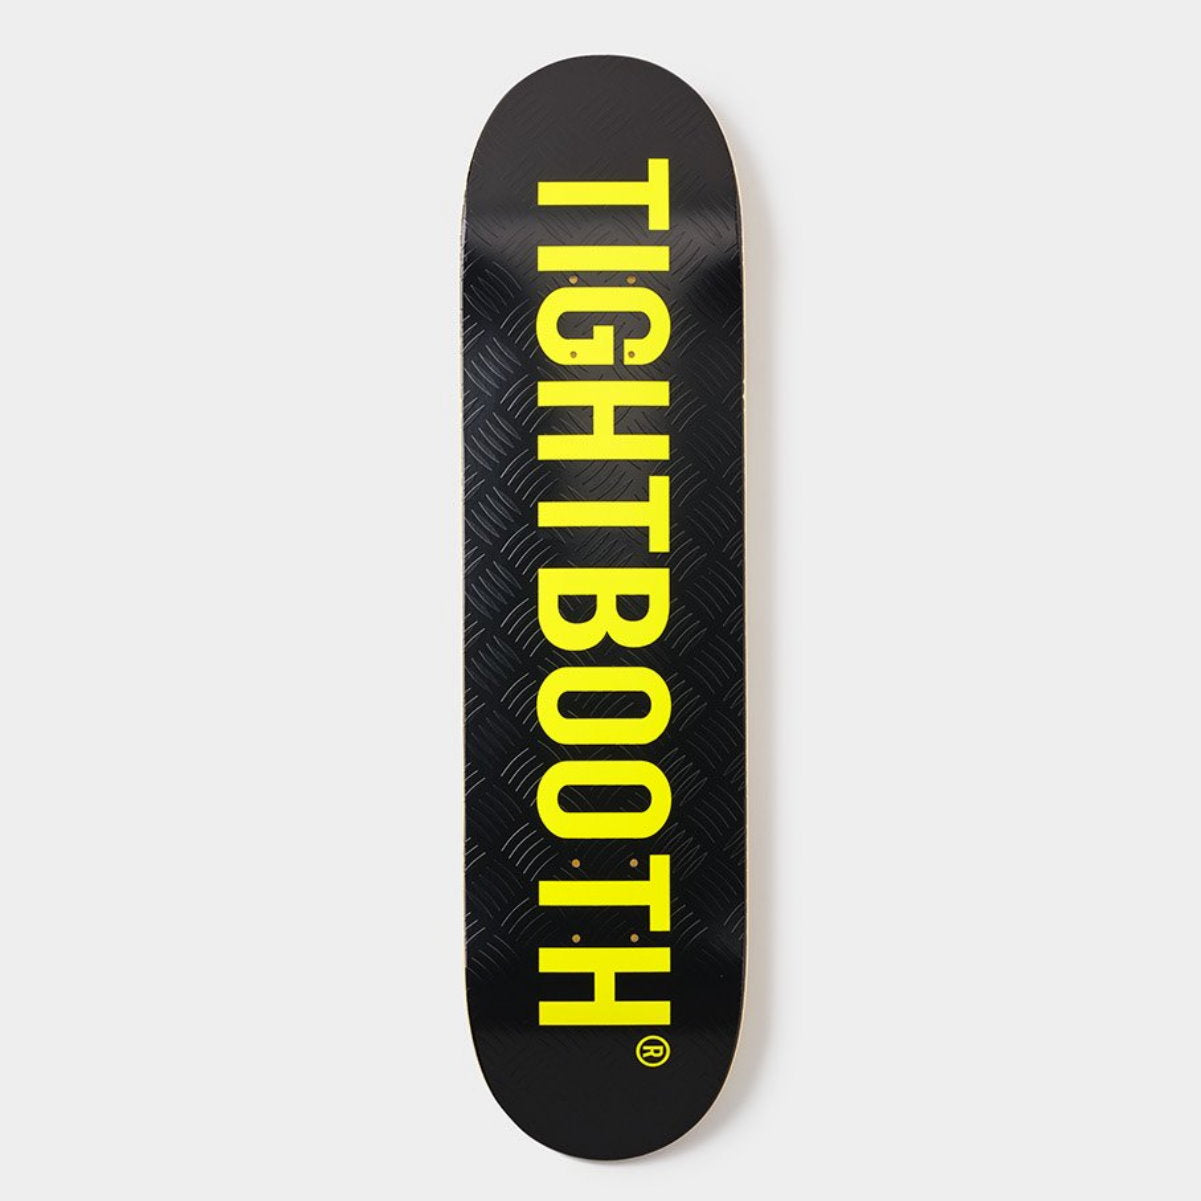 TIGHTBOOTH LOGO BLACK / SAFETY YELLOW DECK